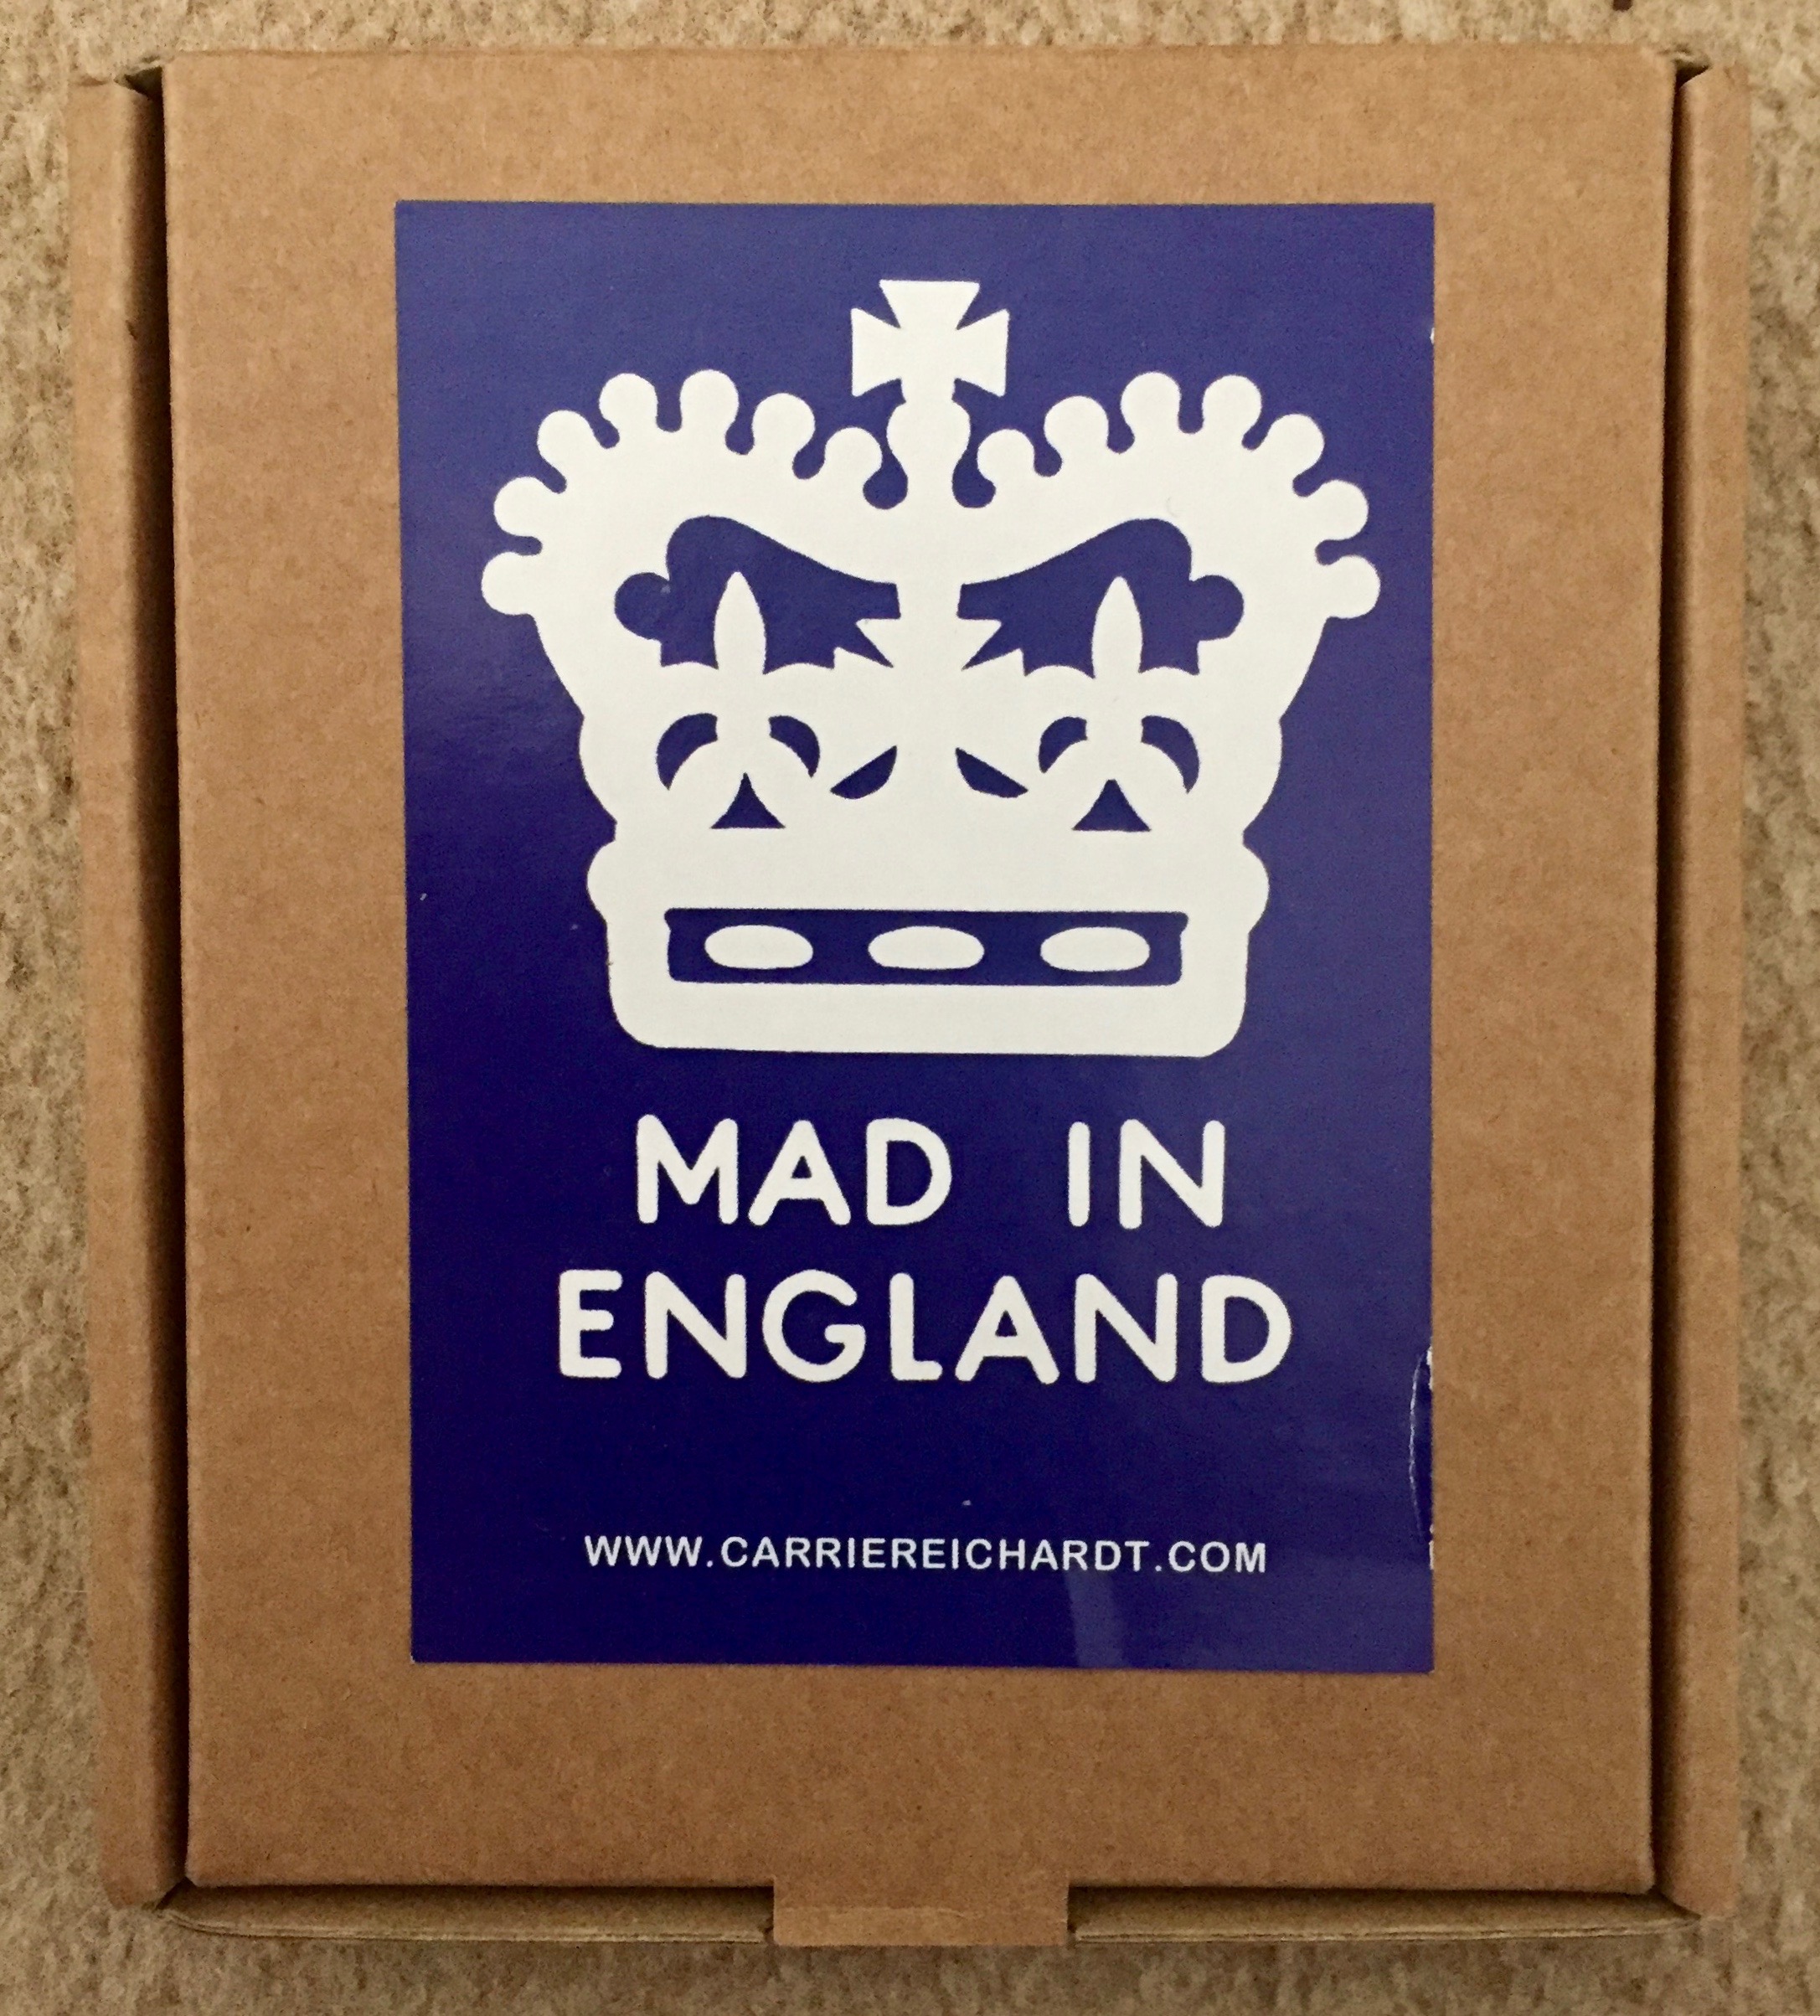 IMG_415mad-in-england-carrie-reichardt-tile